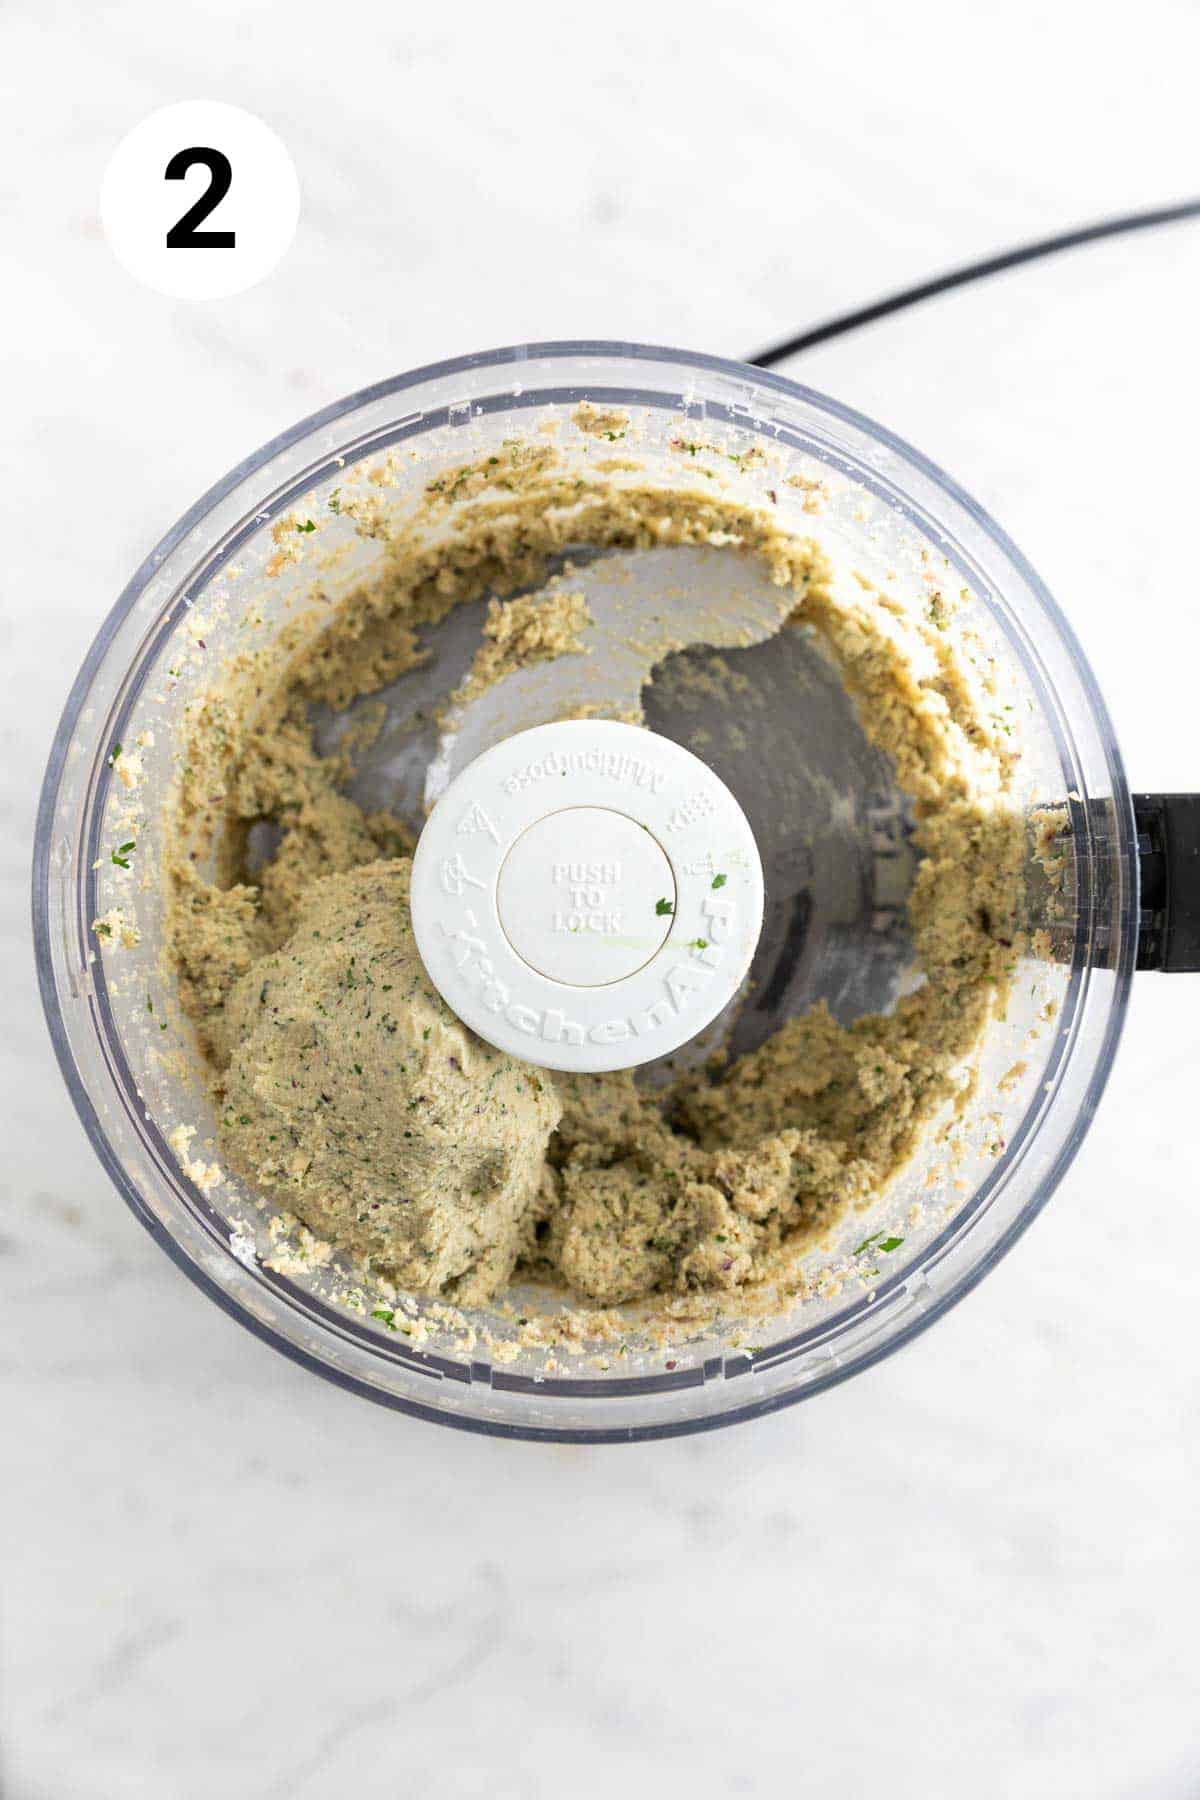 Chickpea burger blend processed in a food processor.